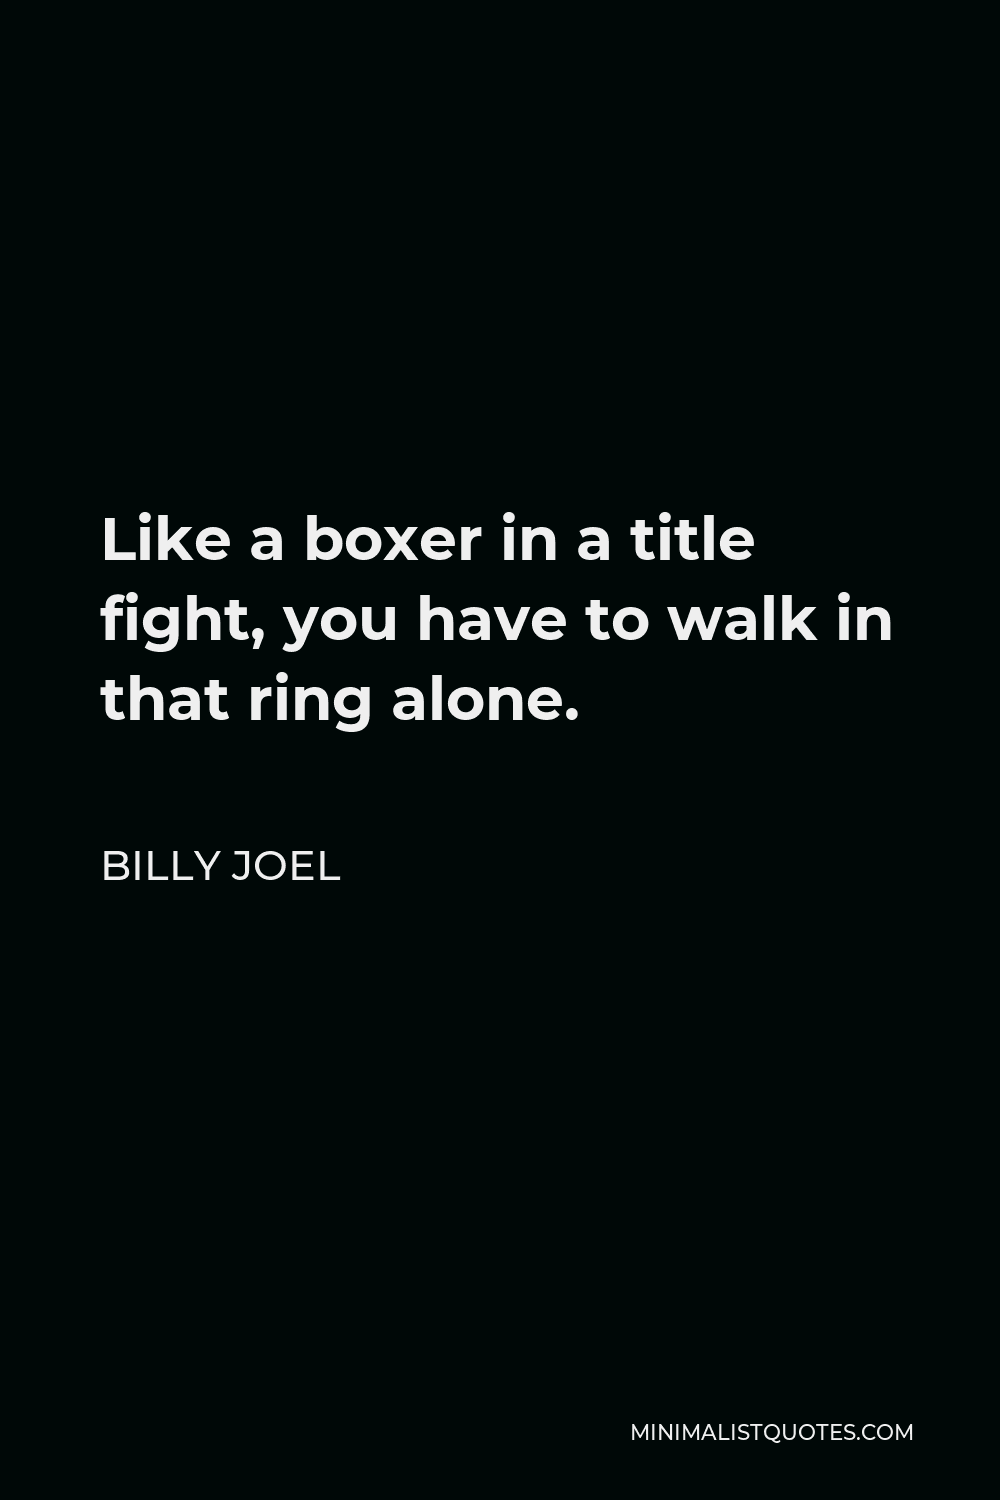 Billy Joel Quote: Like a boxer in a title fight, you have to walk in ...